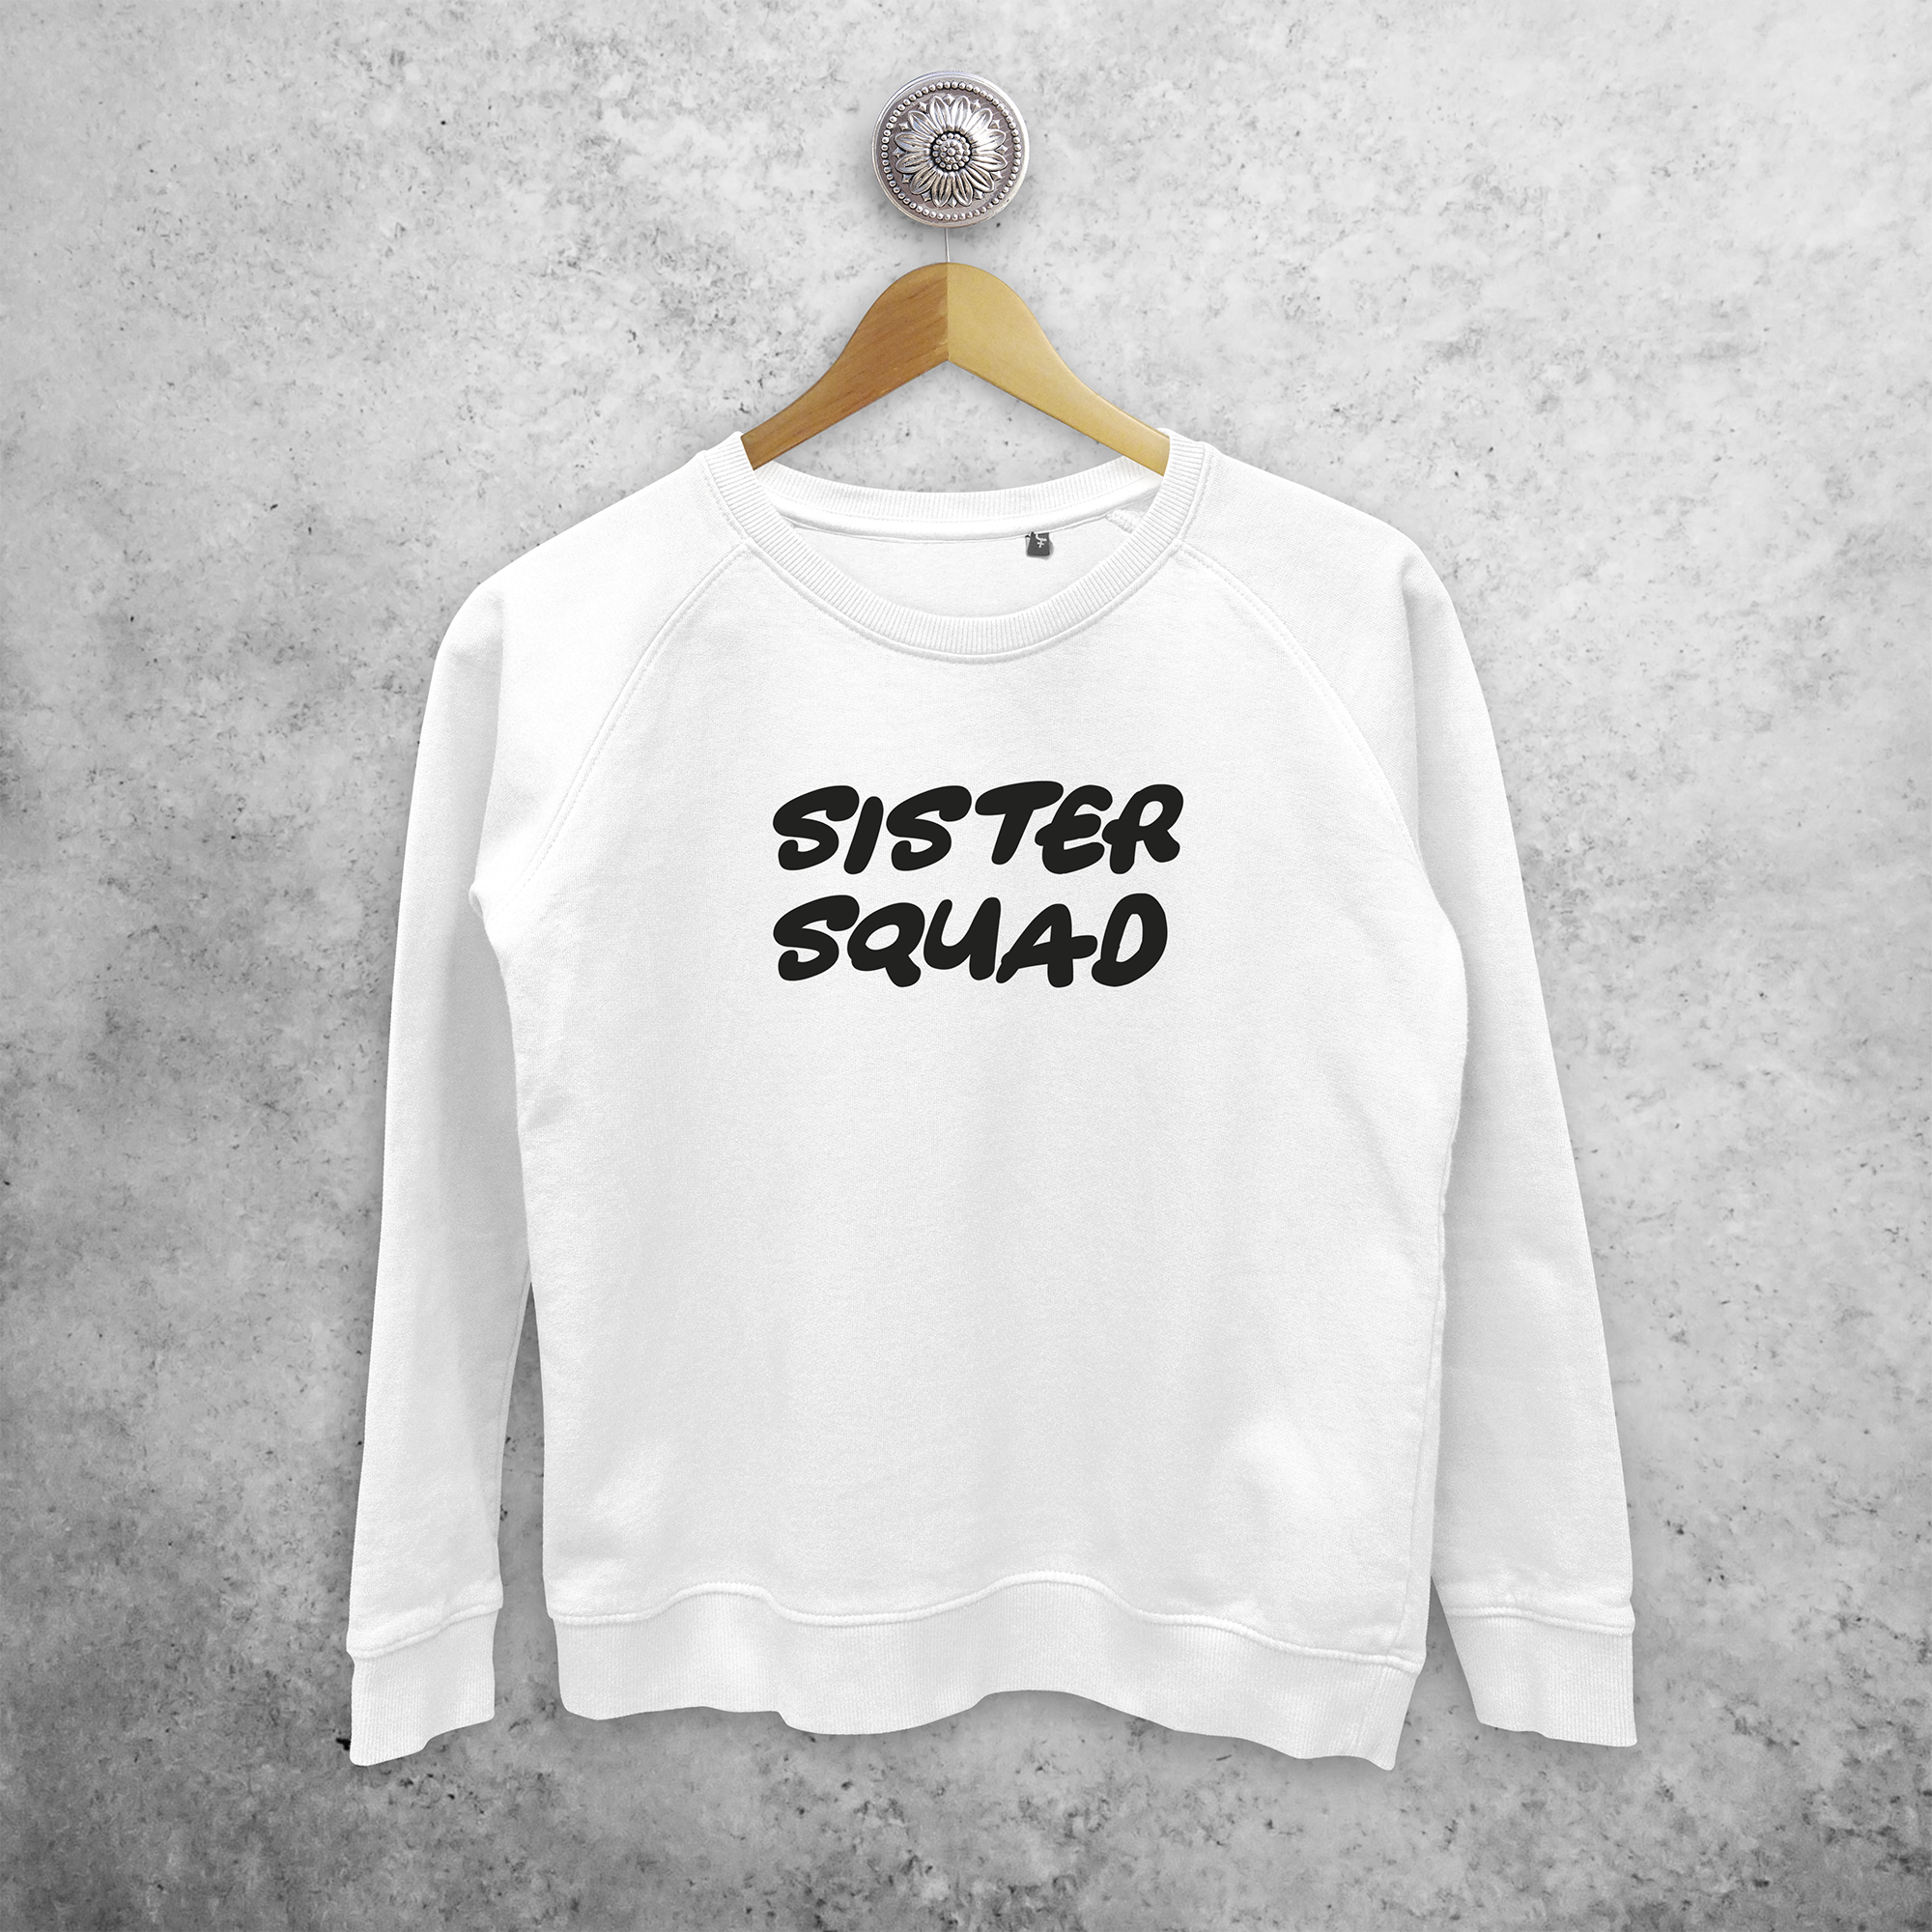 'Sister squad' sweater